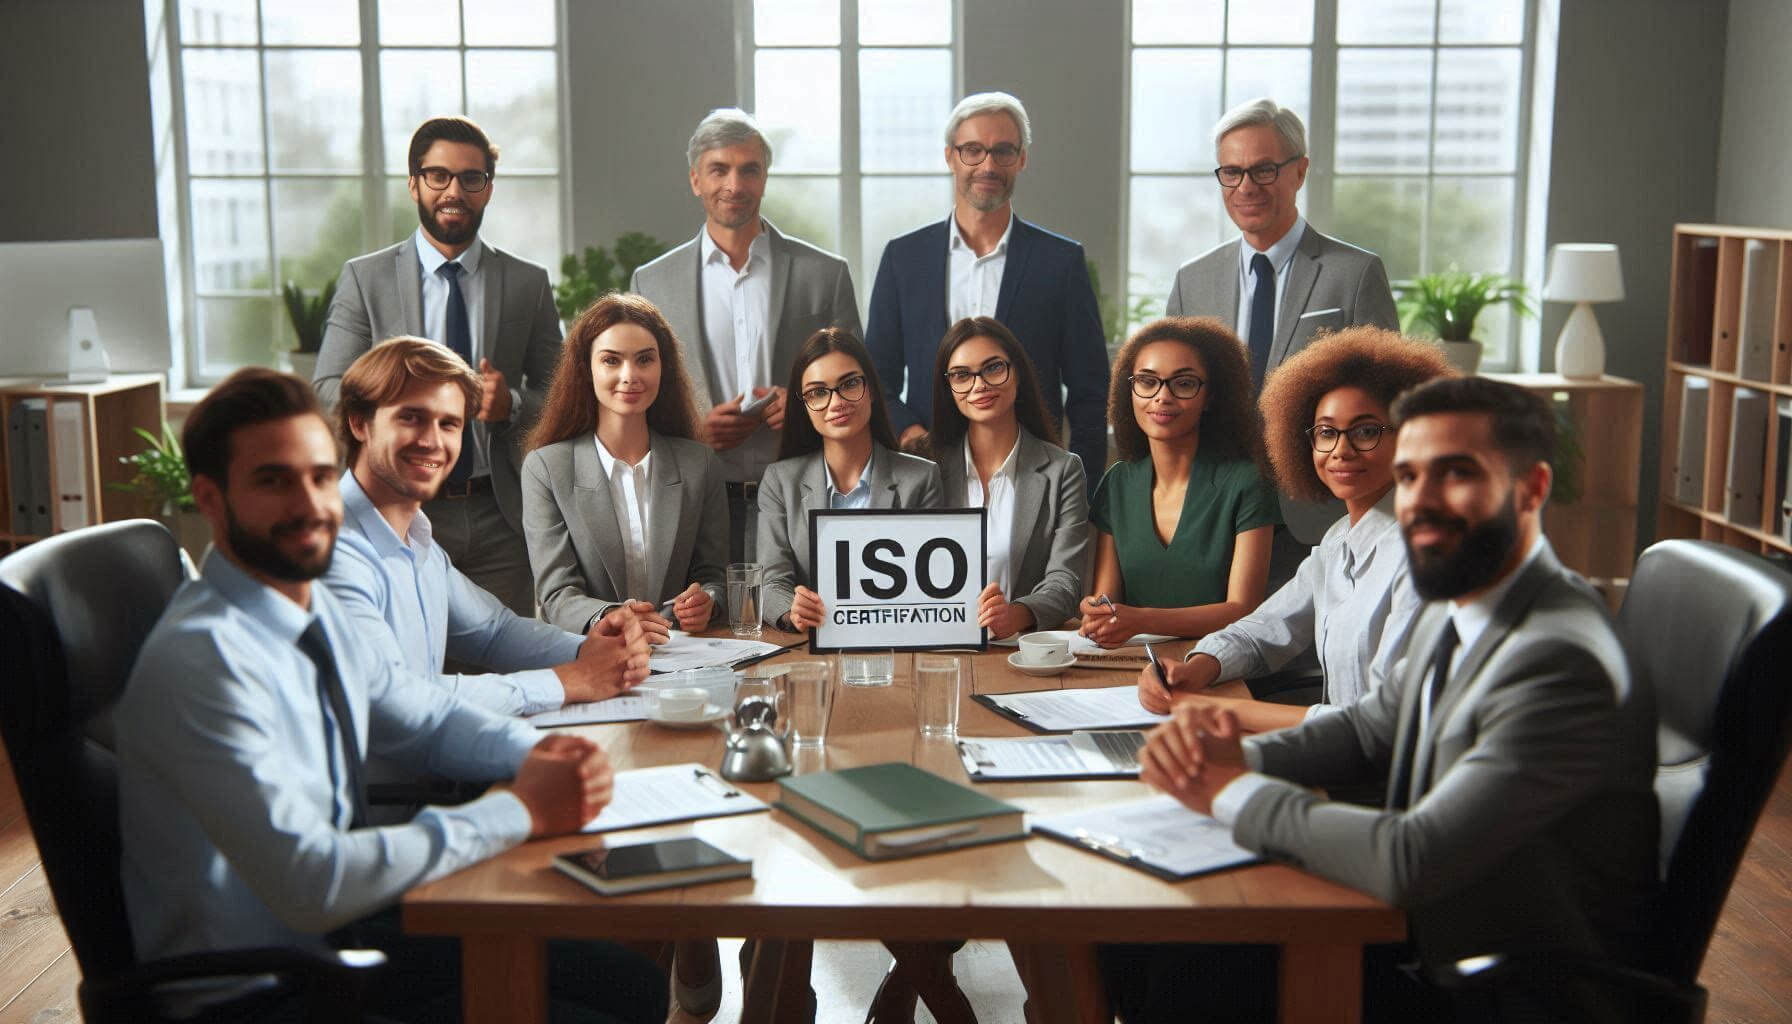 The ISO Certification Process